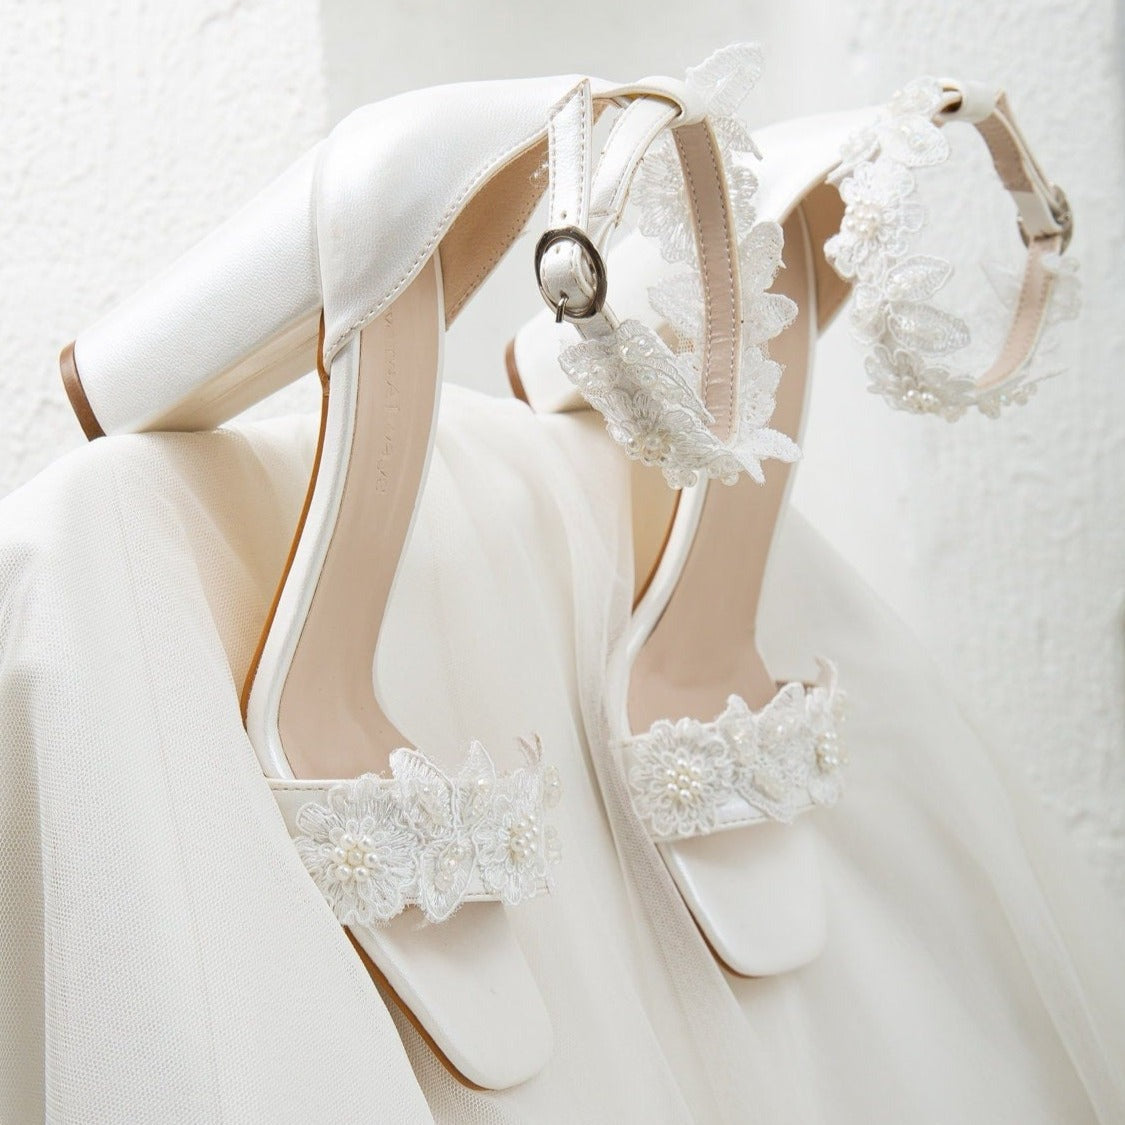 White Heels, White Bride Shoes, Wedding Shoes, White Lace High Heels